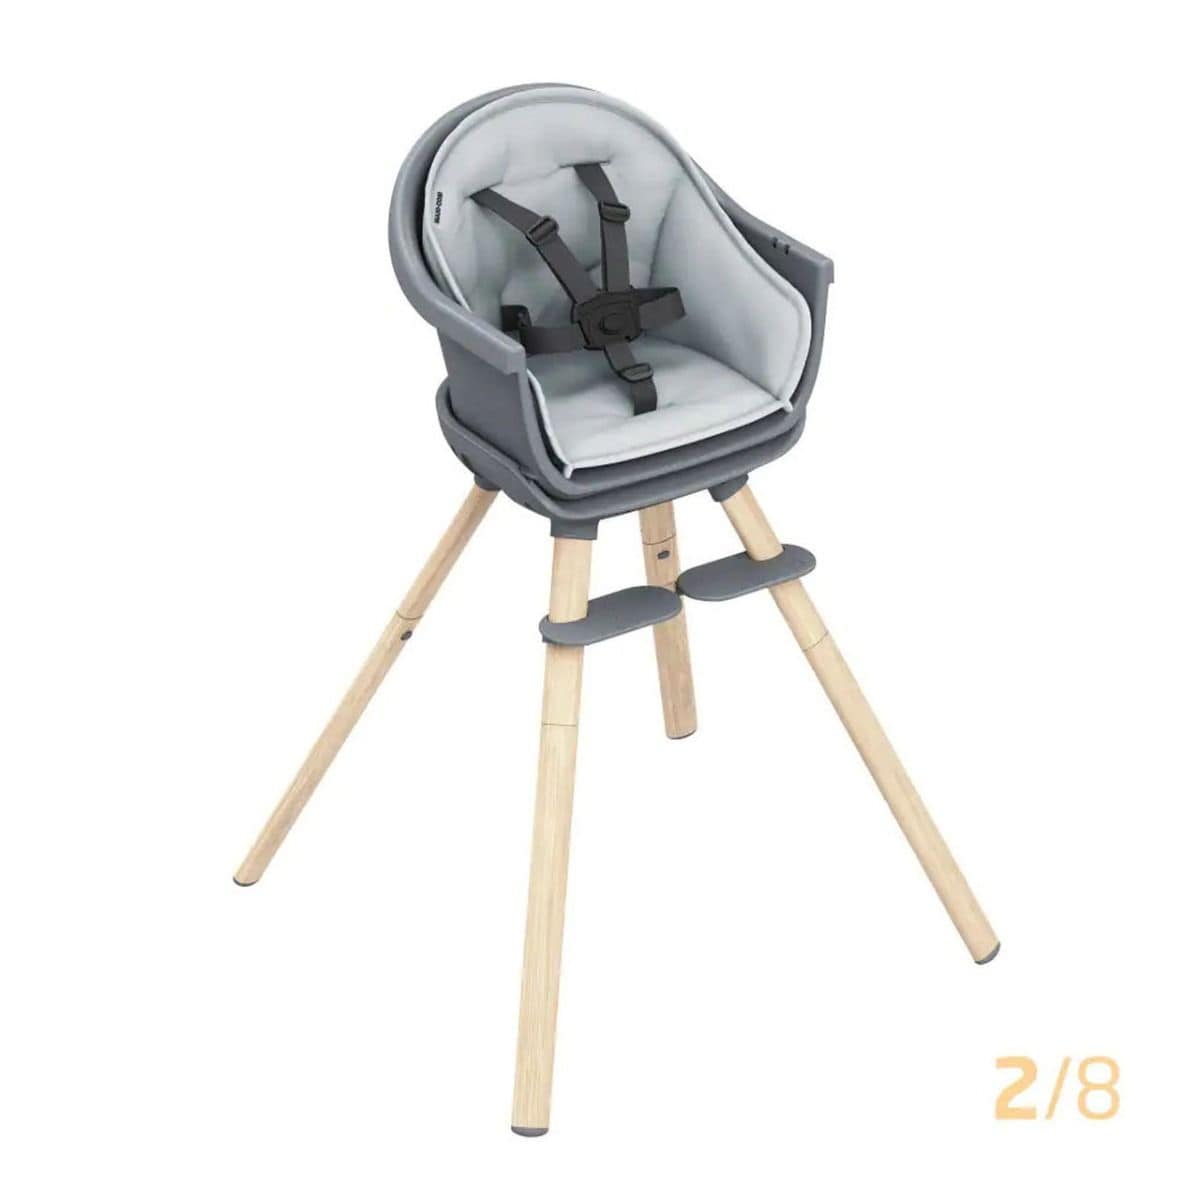 Maxi-Cosi baby highchairs Maxi-Cosi Moa 8-in-1 Highchair- Beyond Graphite 2710043300